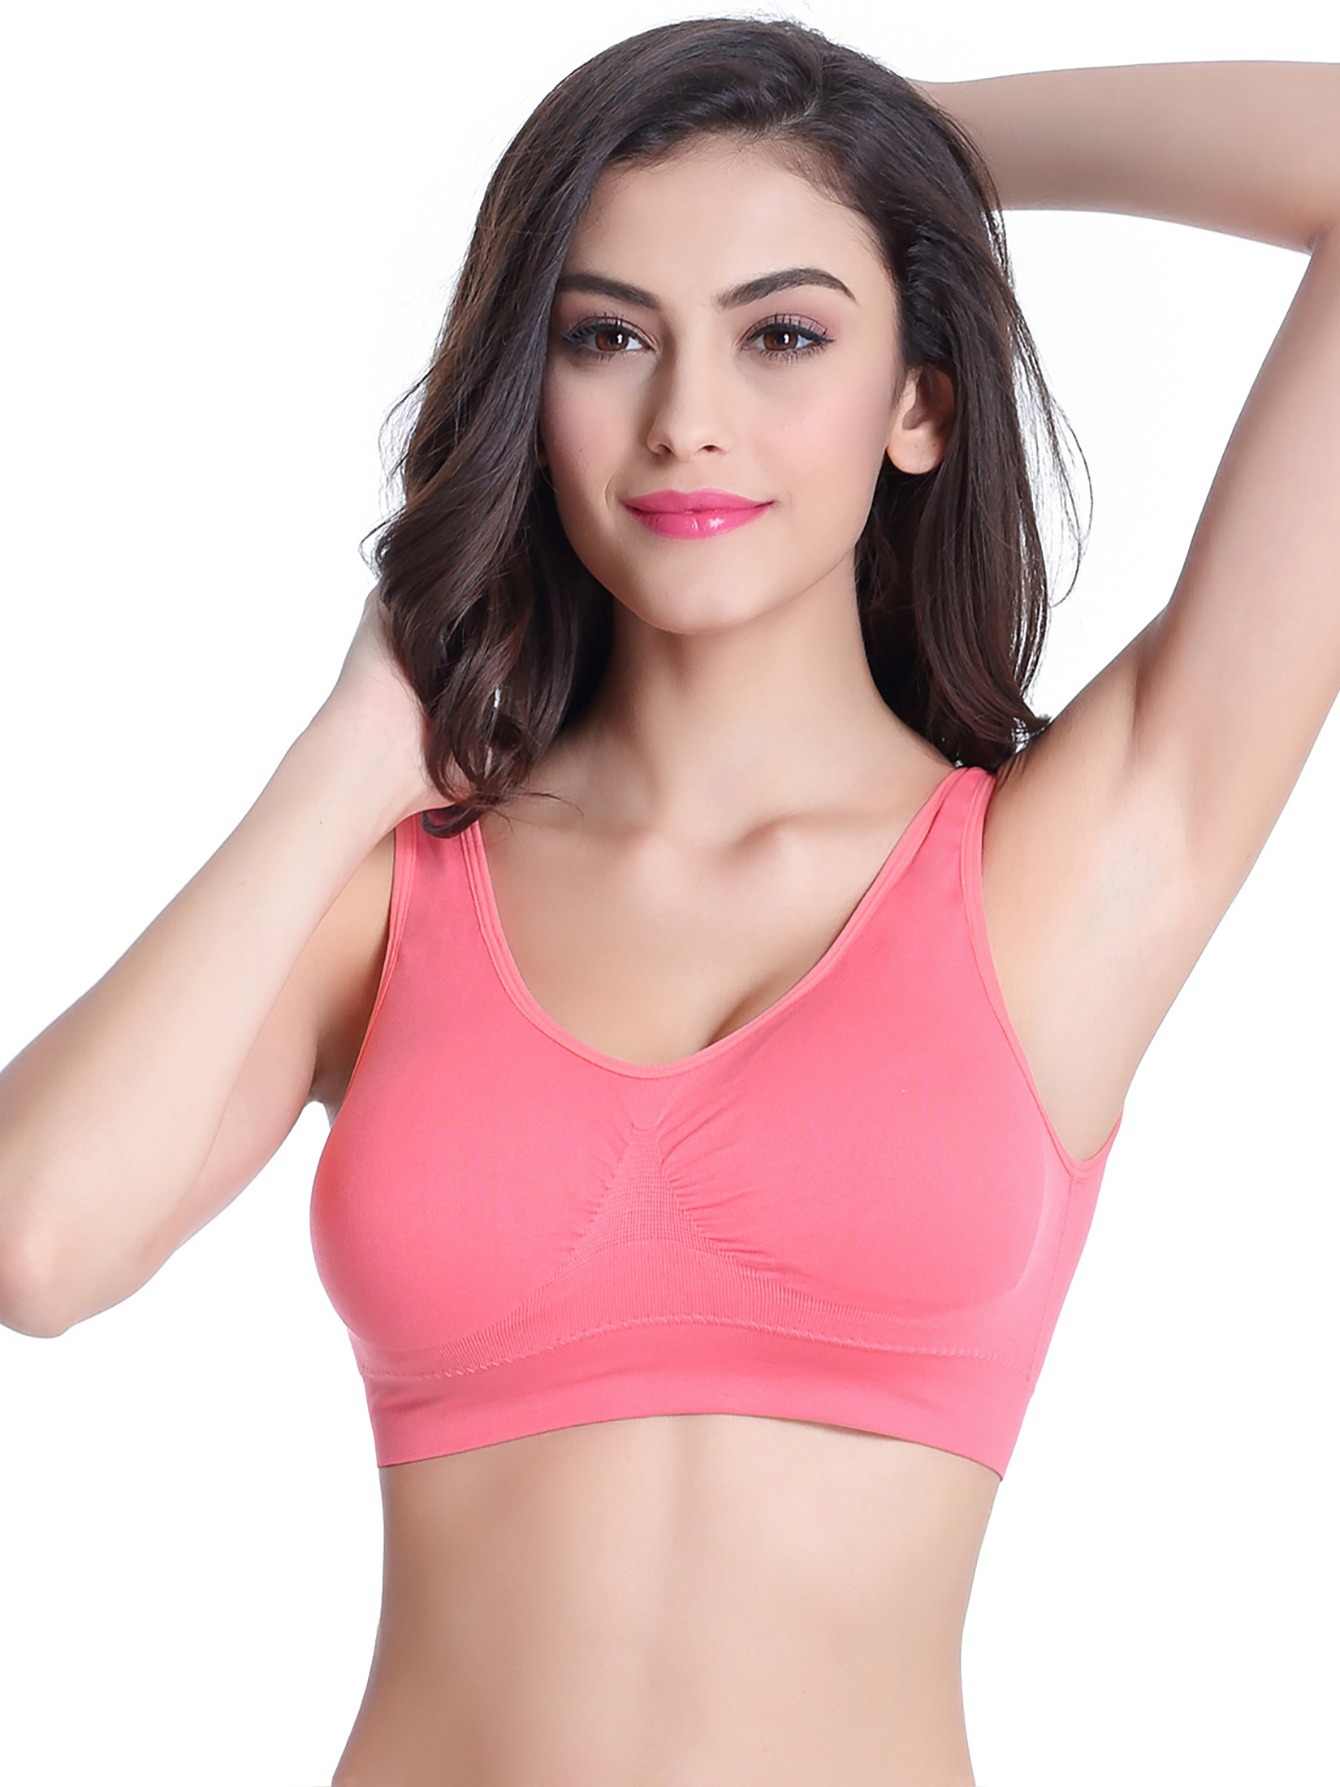  g Cup Size red Sports Bra Push up Bralette hot Women